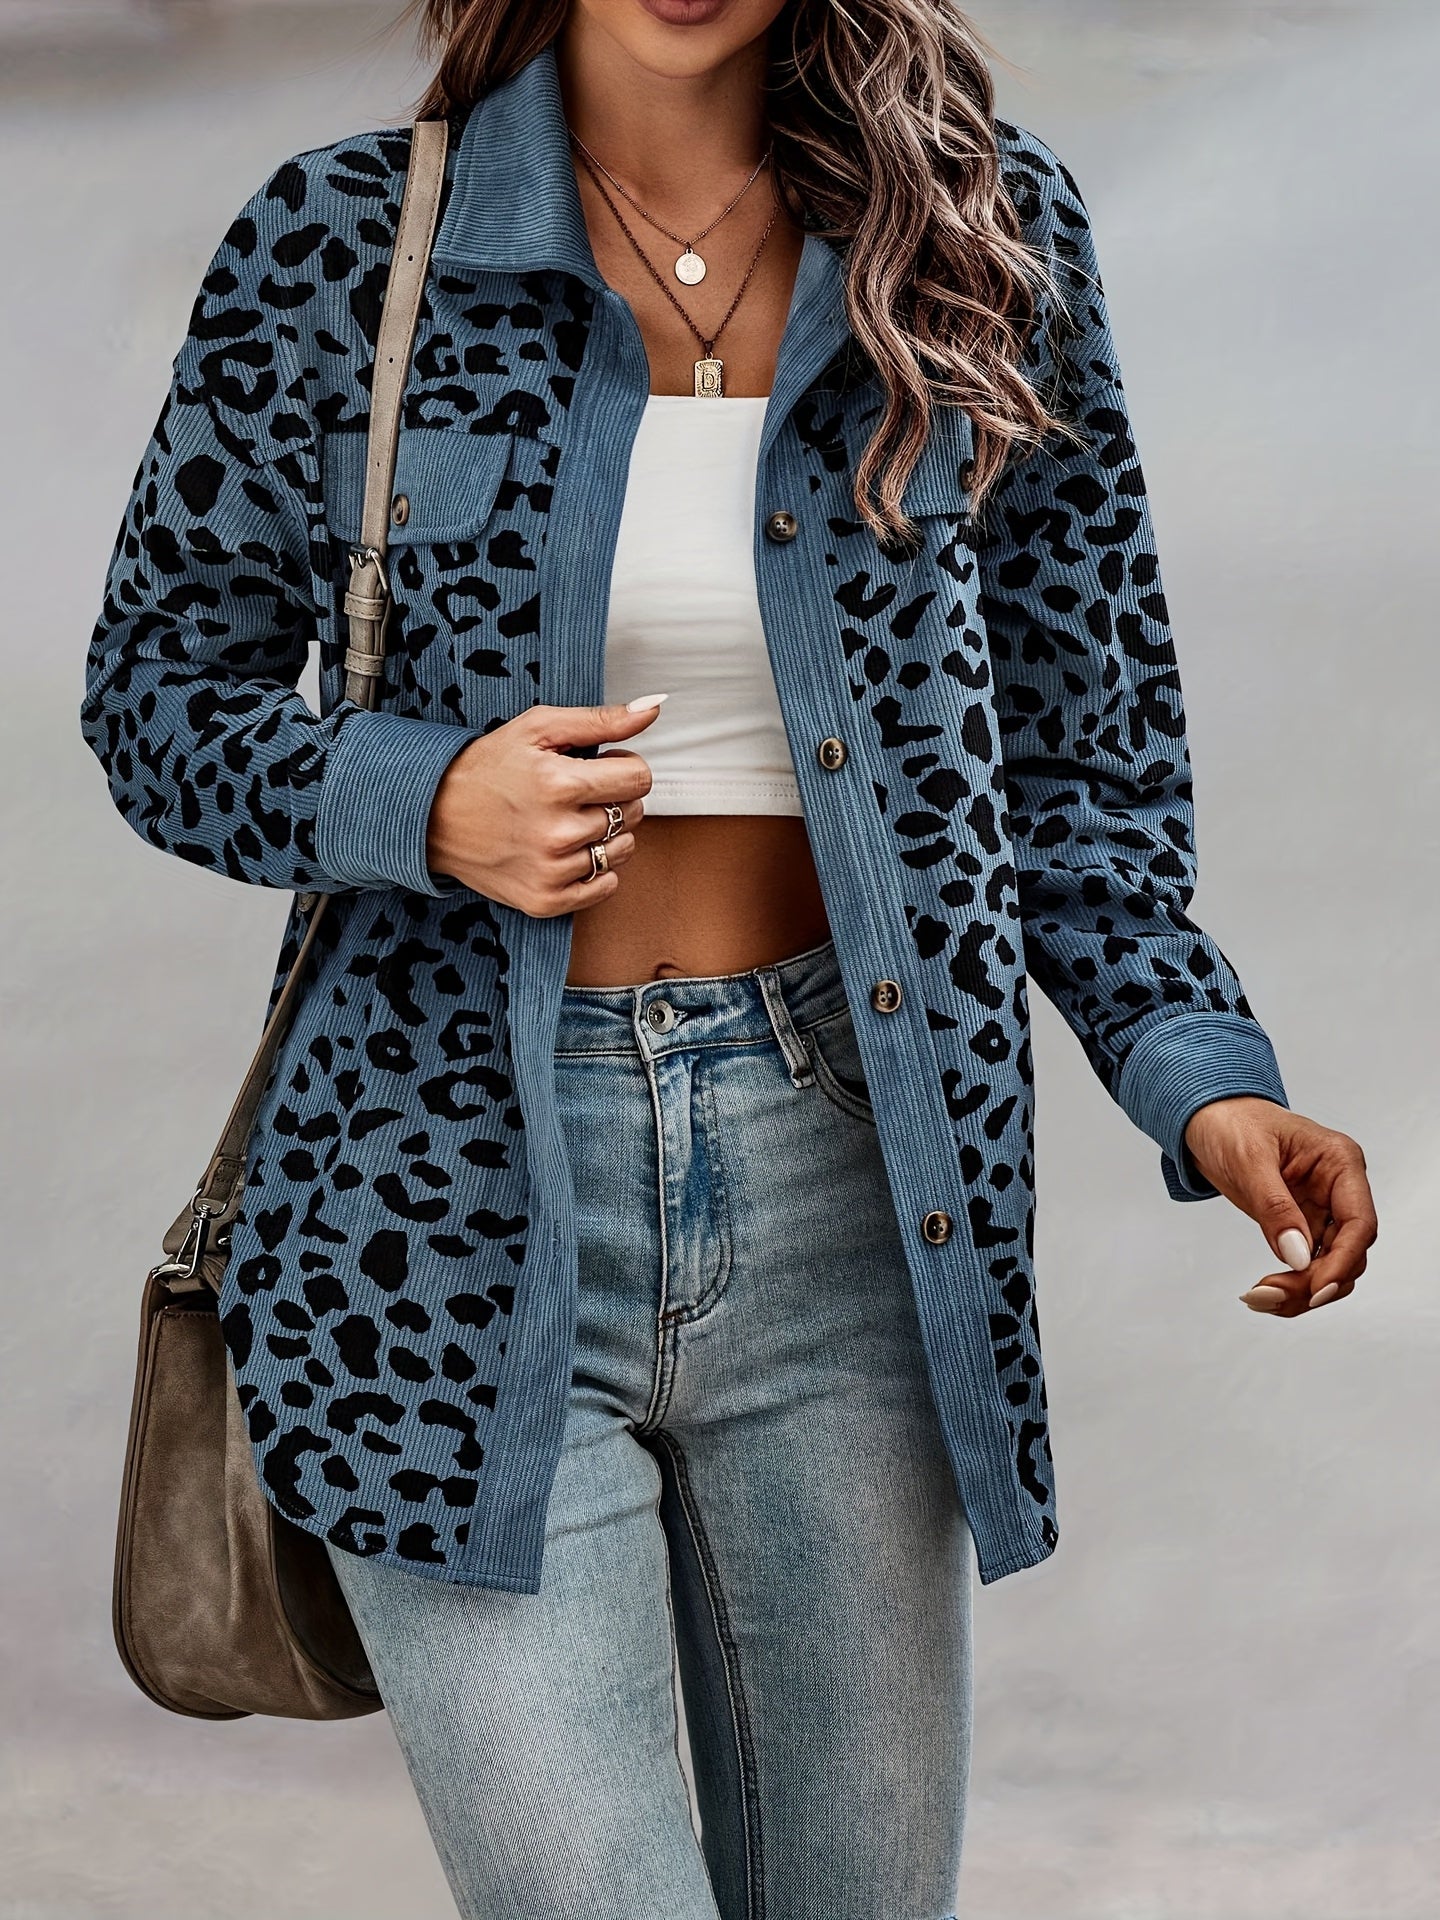 Women's Leopard Print Shacket Jacket - Stylish and Comfortable Outerwear